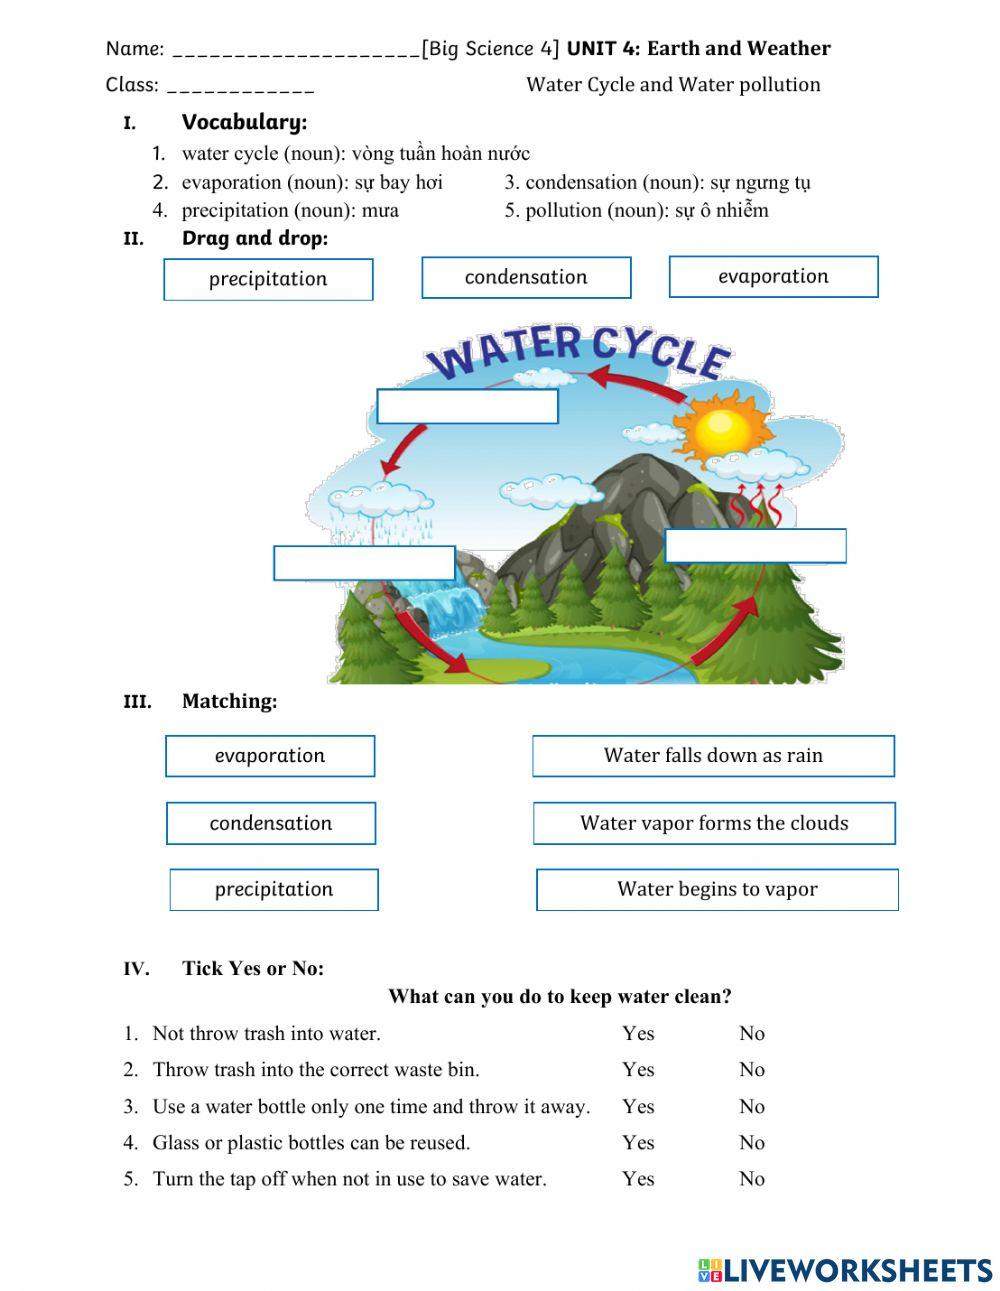 Big Science 4 Water cycle & Pollution